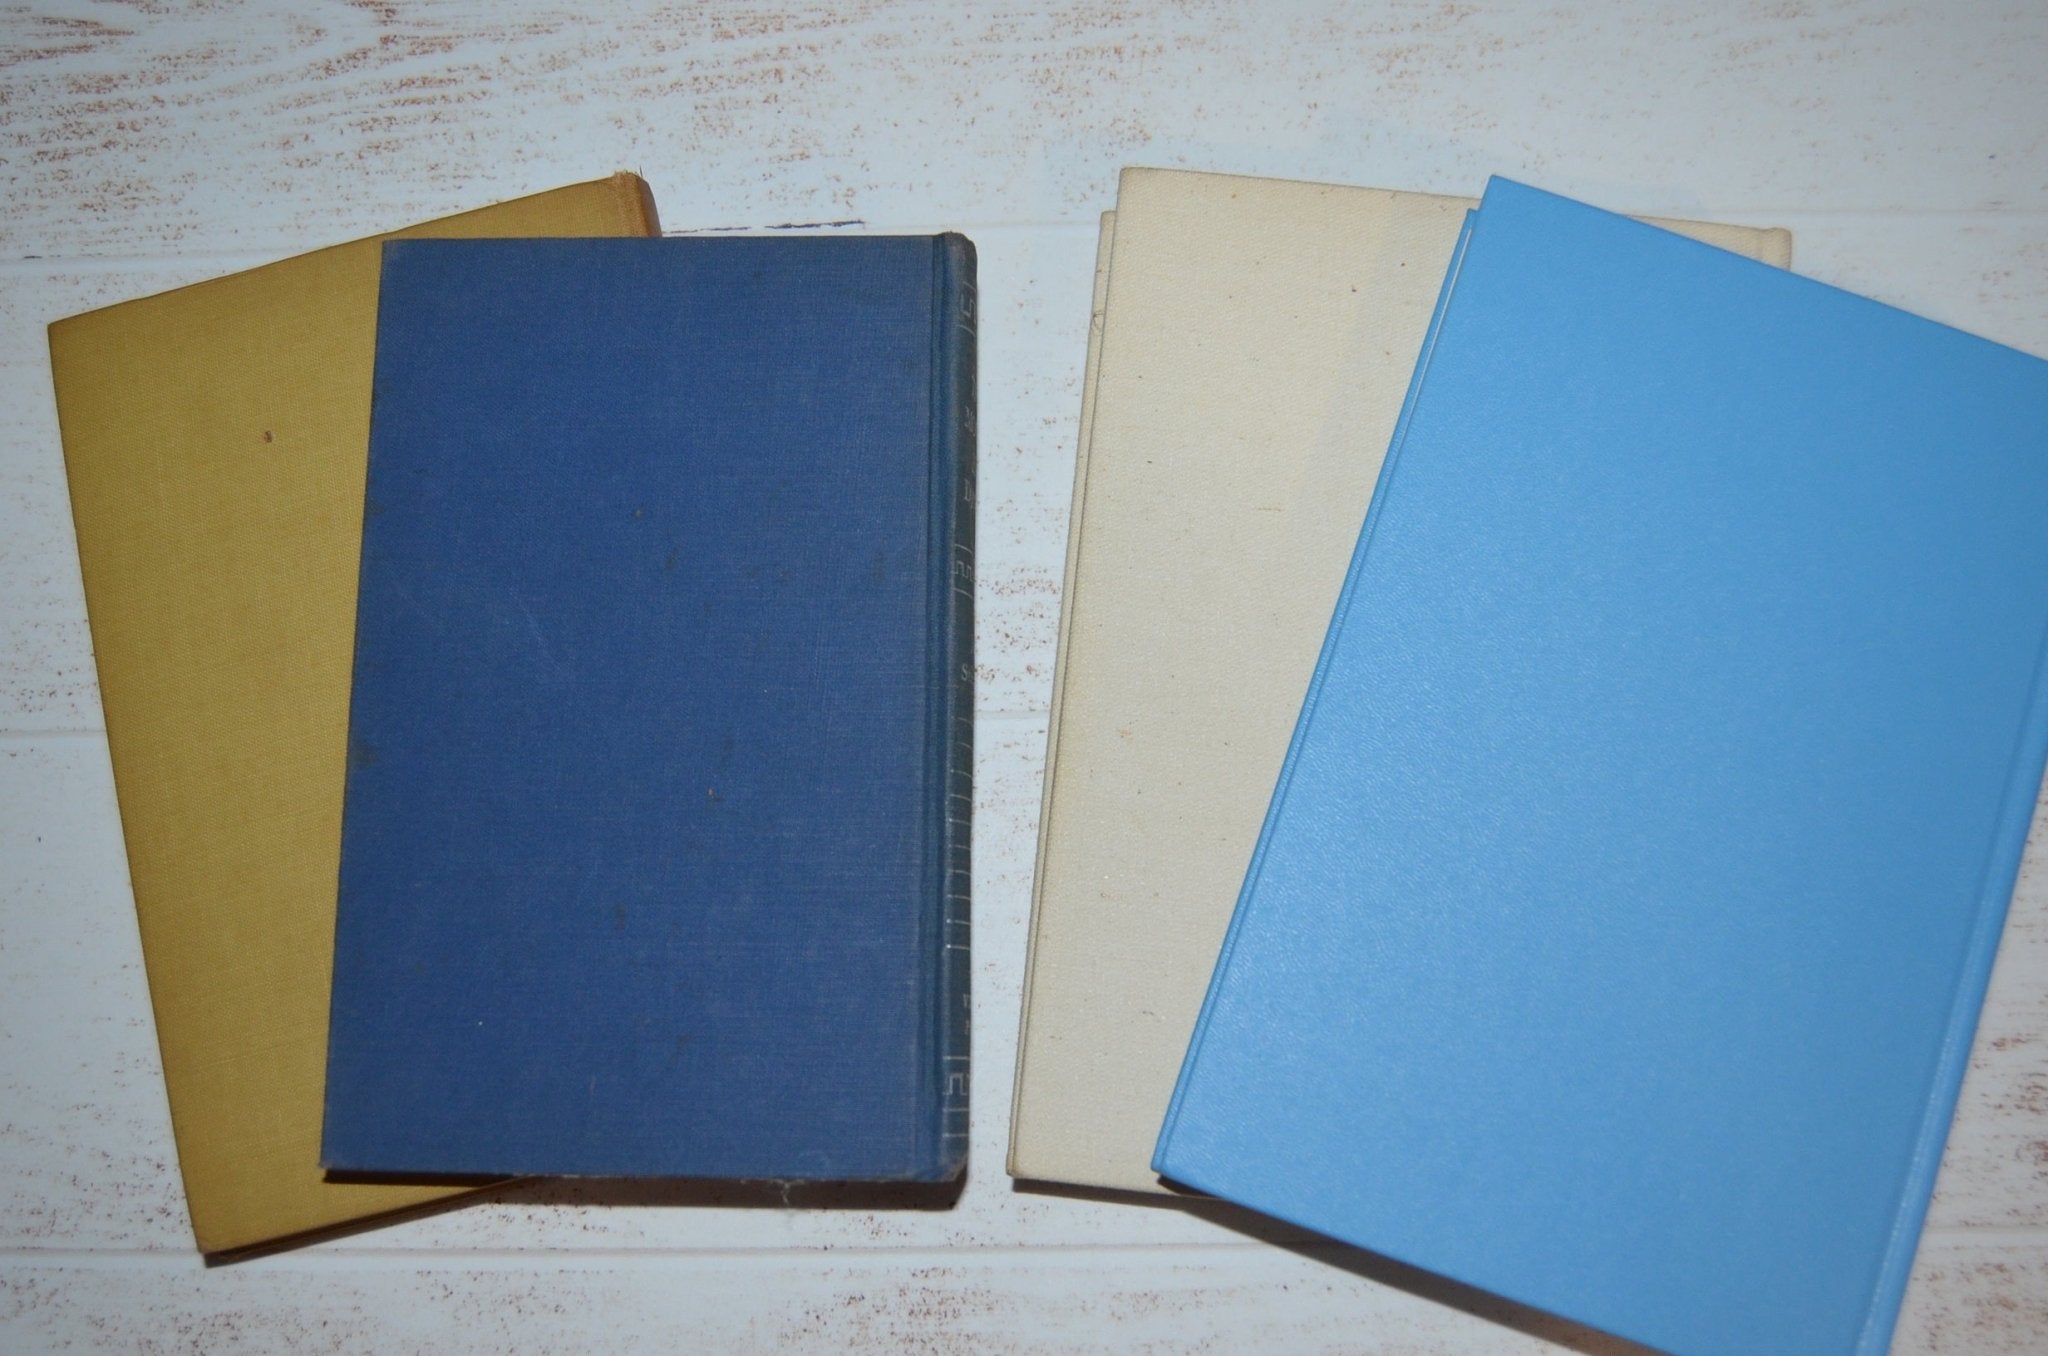 Vintage John Steinbeck Set – Travels With Charley, Sweet Thursday, The Moon Is Down - Brookfield Books